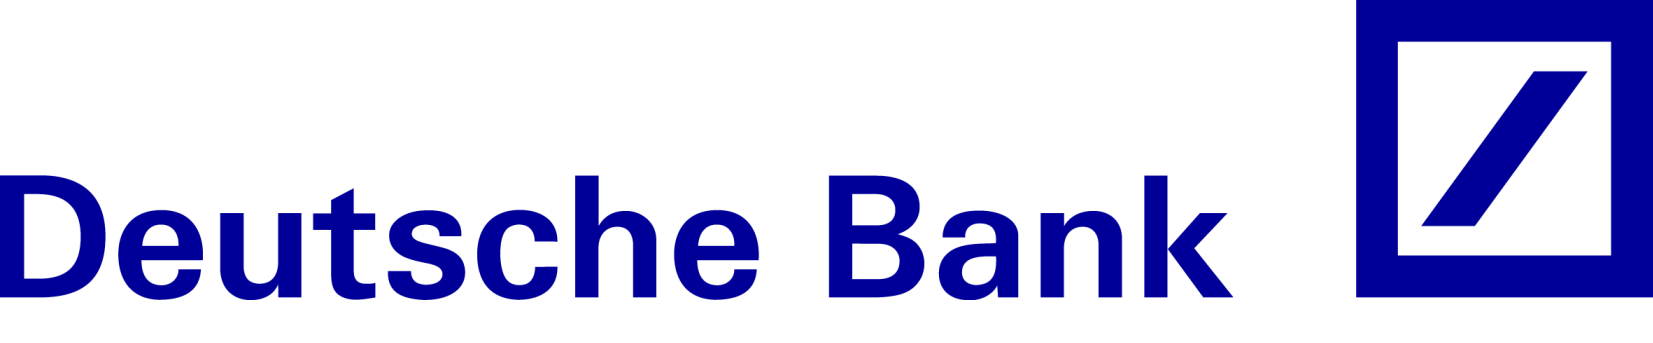 Top 10 Big Banking & Financial Institution Logos, and their Meanings | bachmanstudios